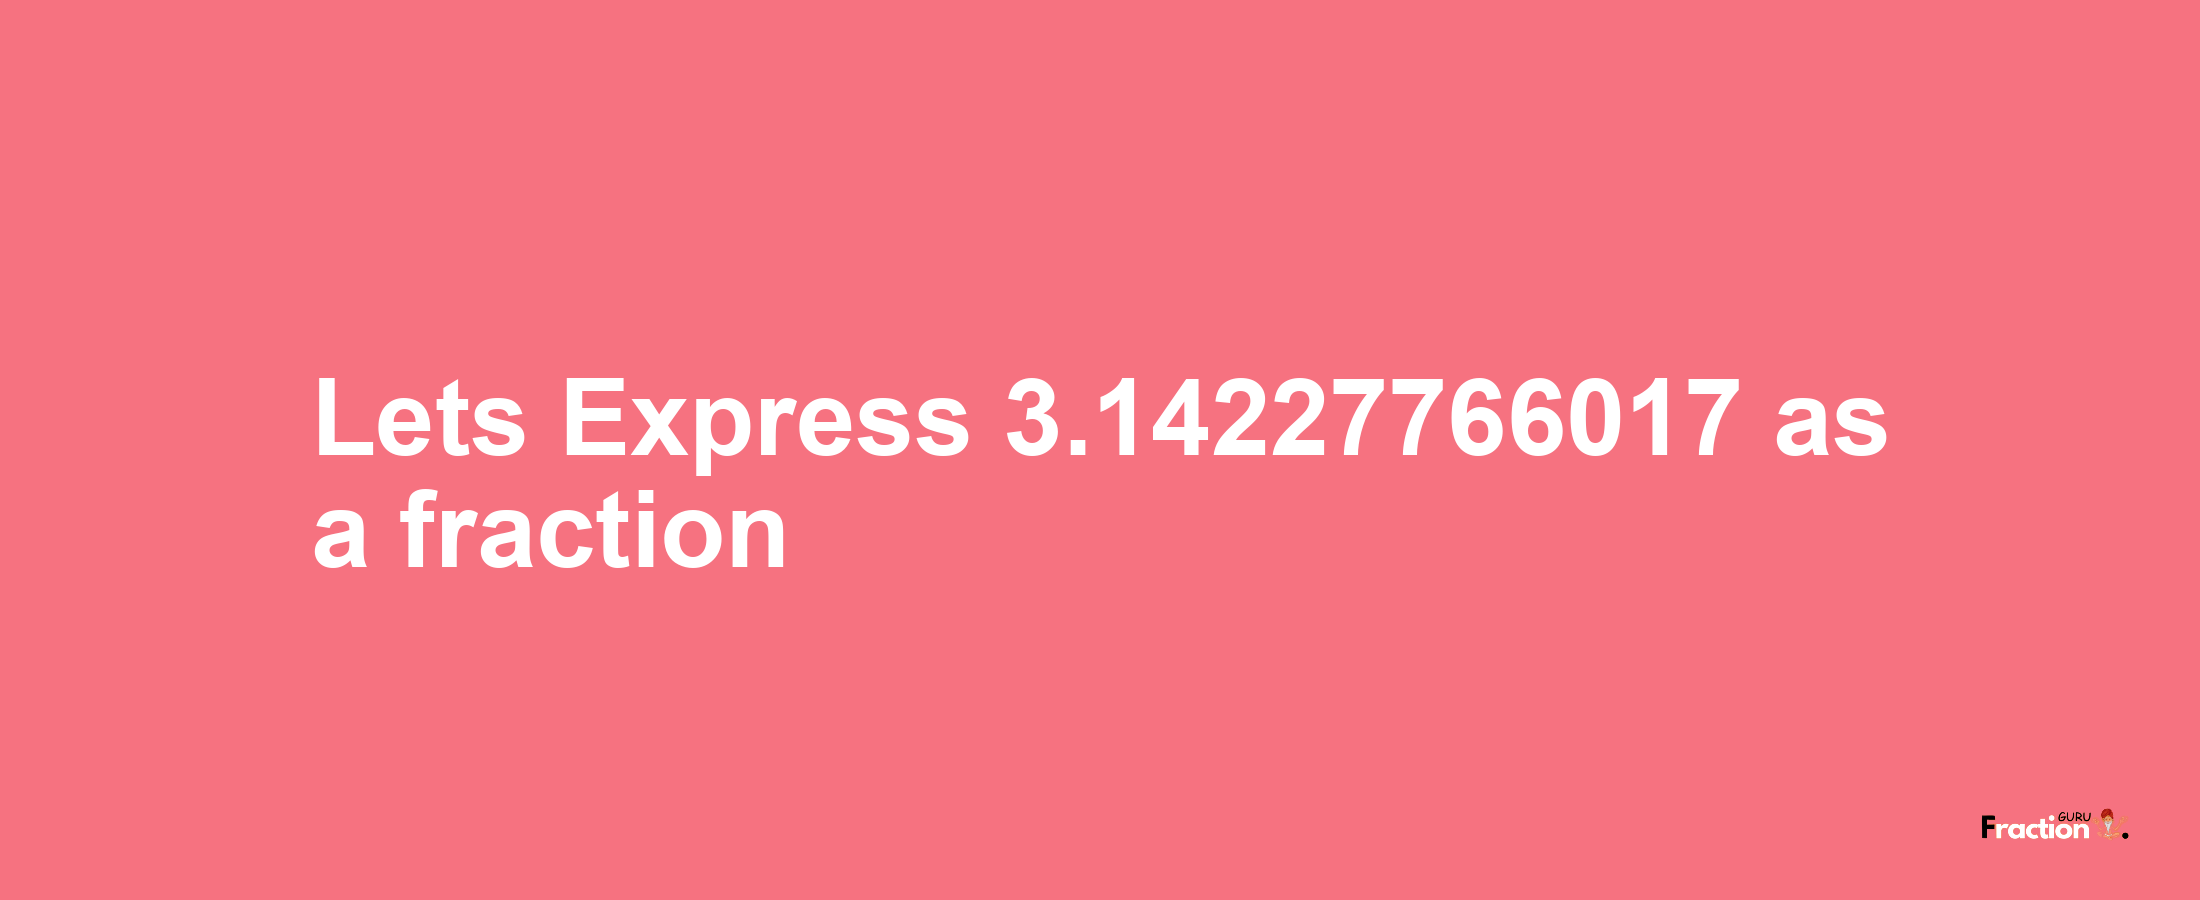 Lets Express 3.14227766017 as afraction